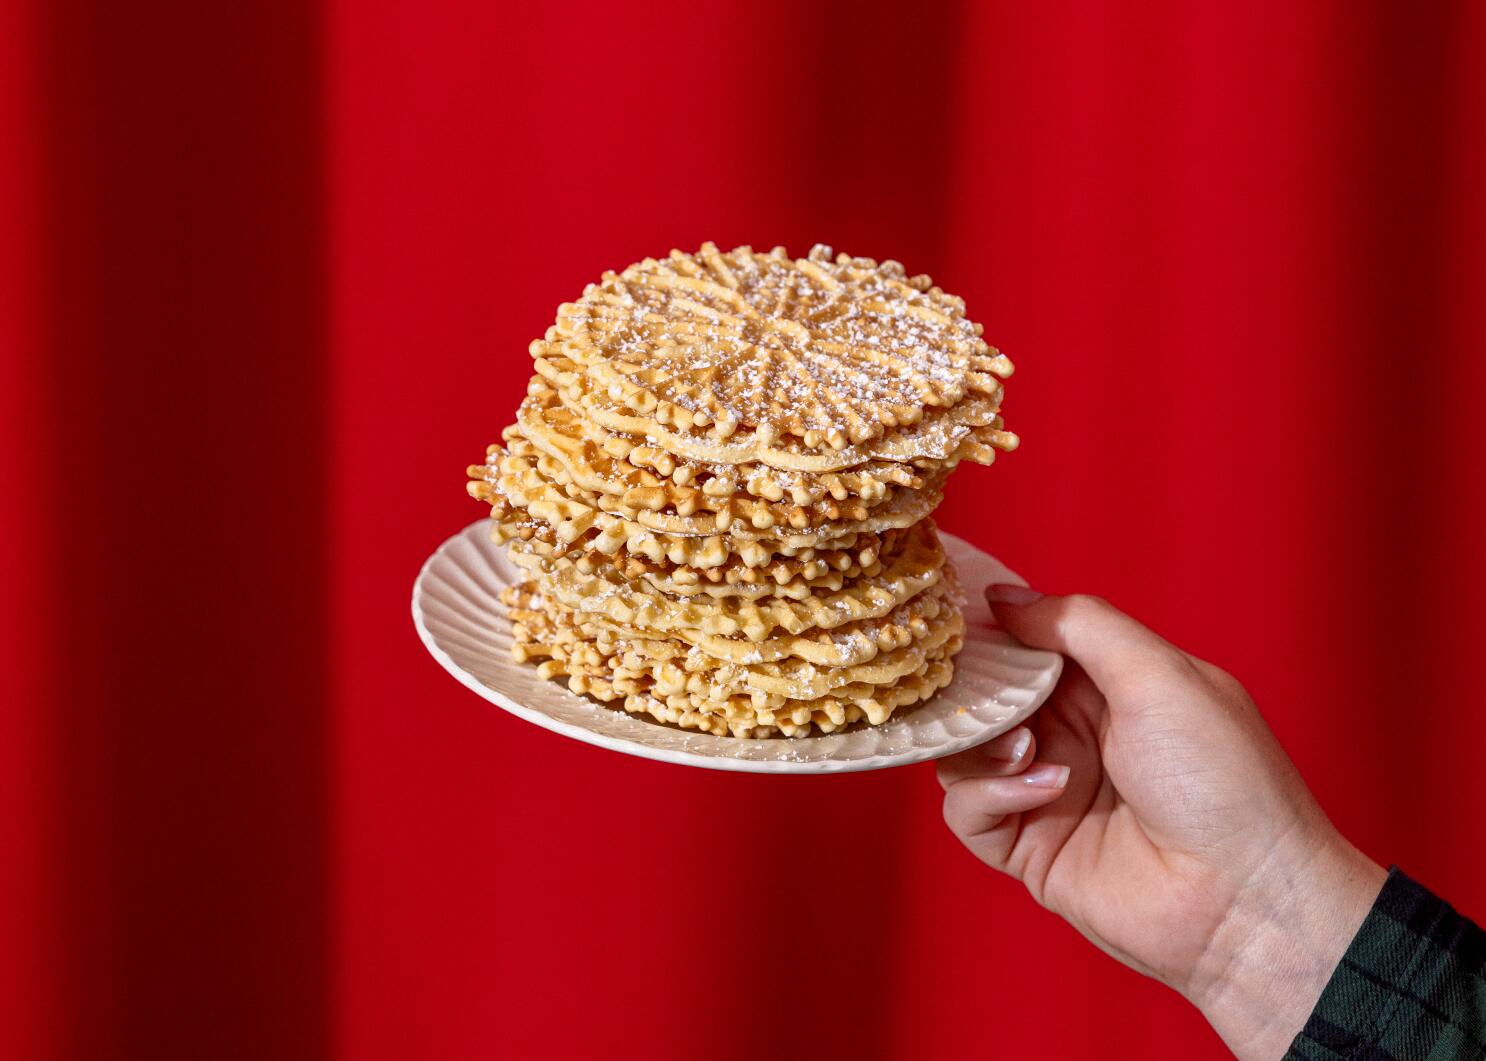 Classic Italian Pizzelle - My Sequined Life